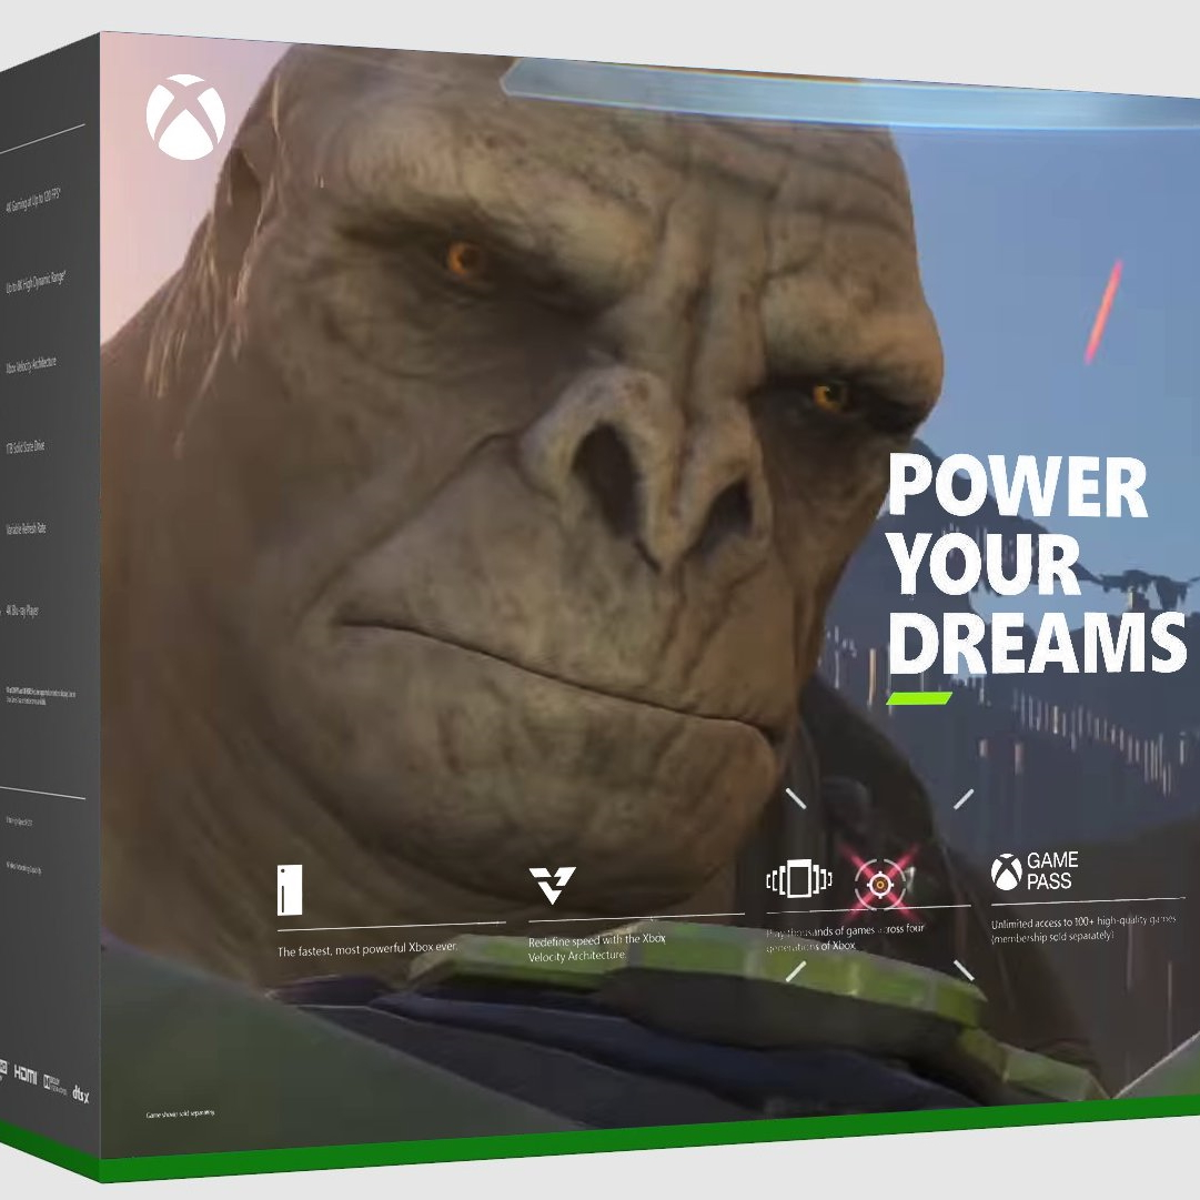 The back of the Xbox Series X retail box prominently features Master Chief,  so fans replaced him with Craig